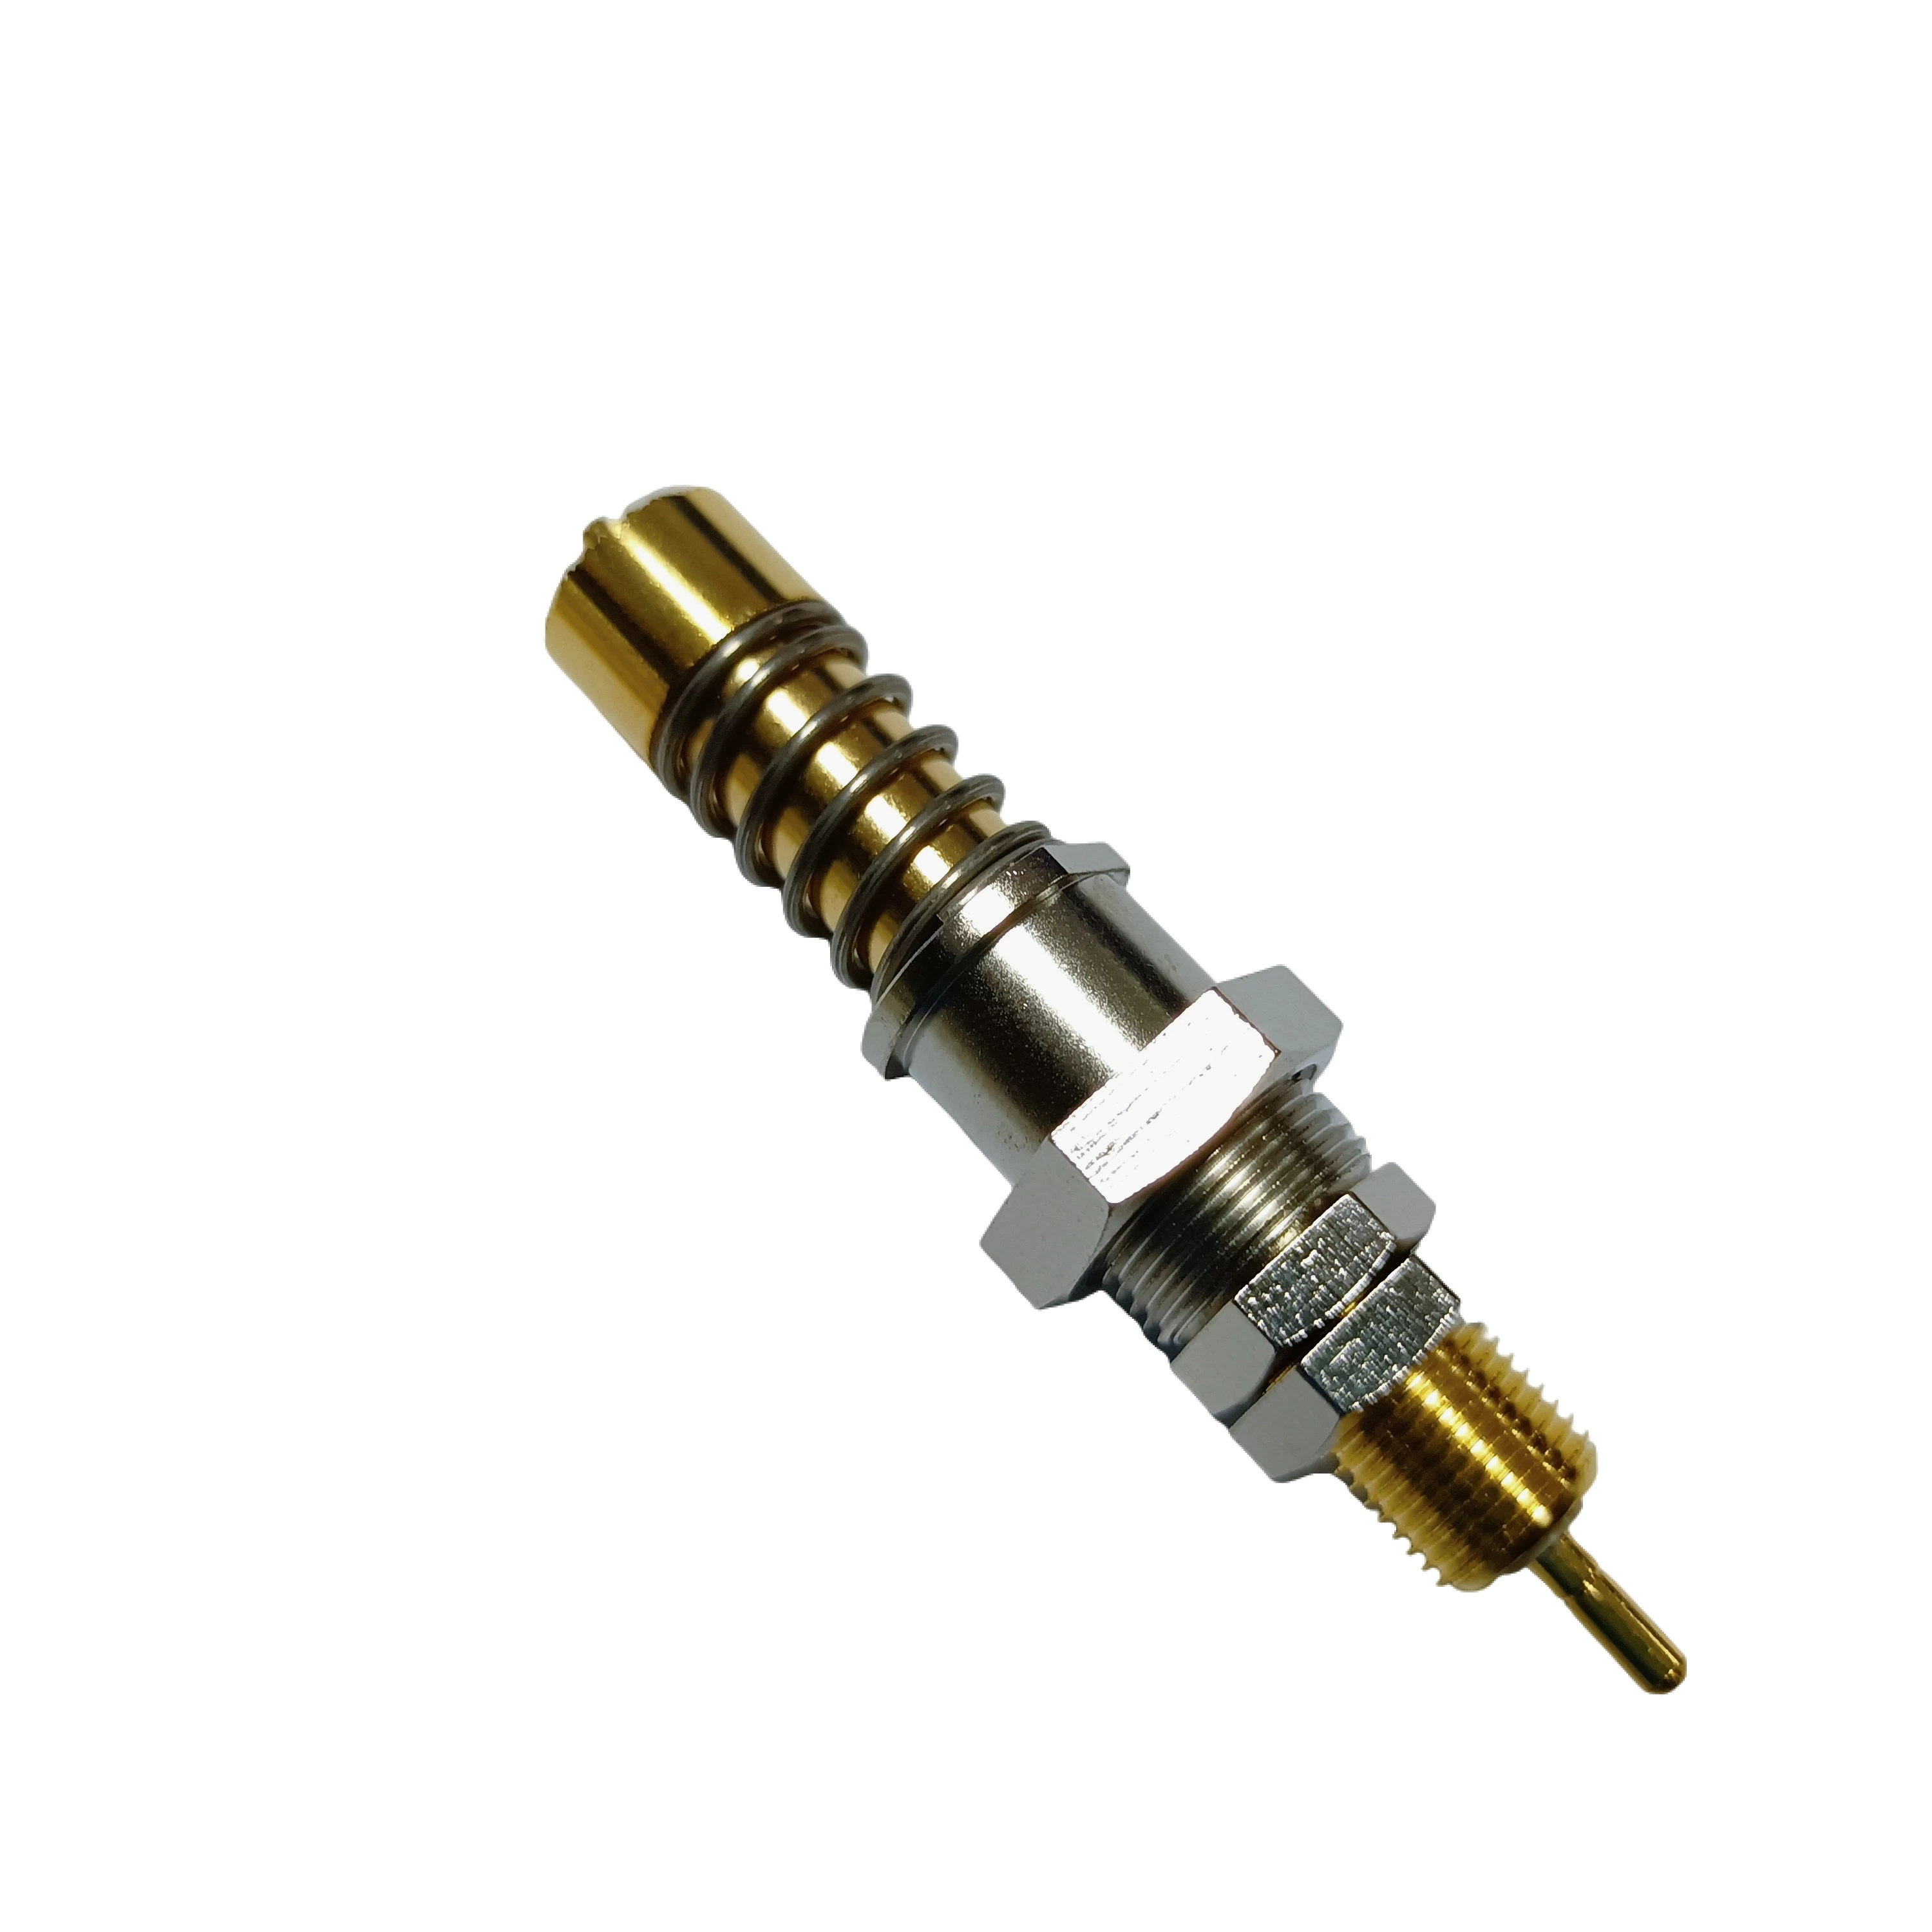 SFENG brand high current pogo pin coaxial pin 50A